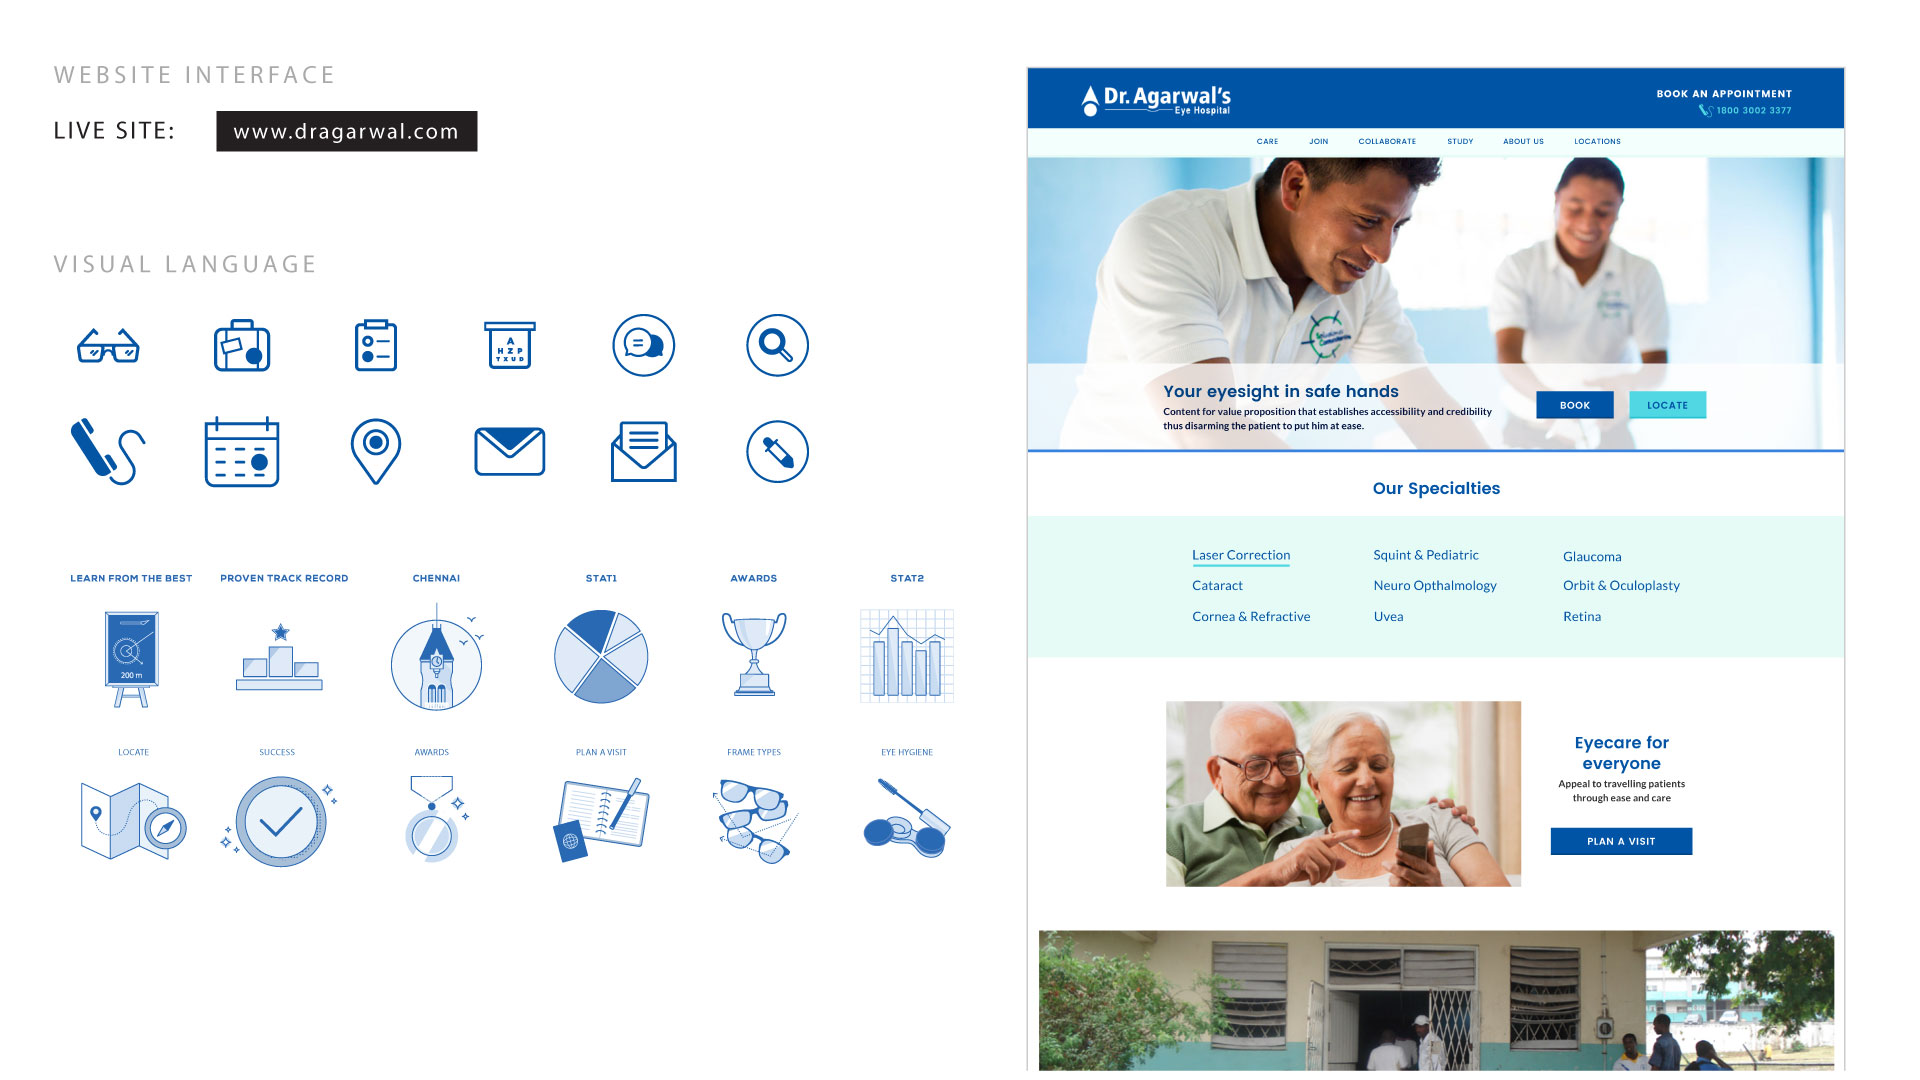 Website designed blue icons and elements for web.